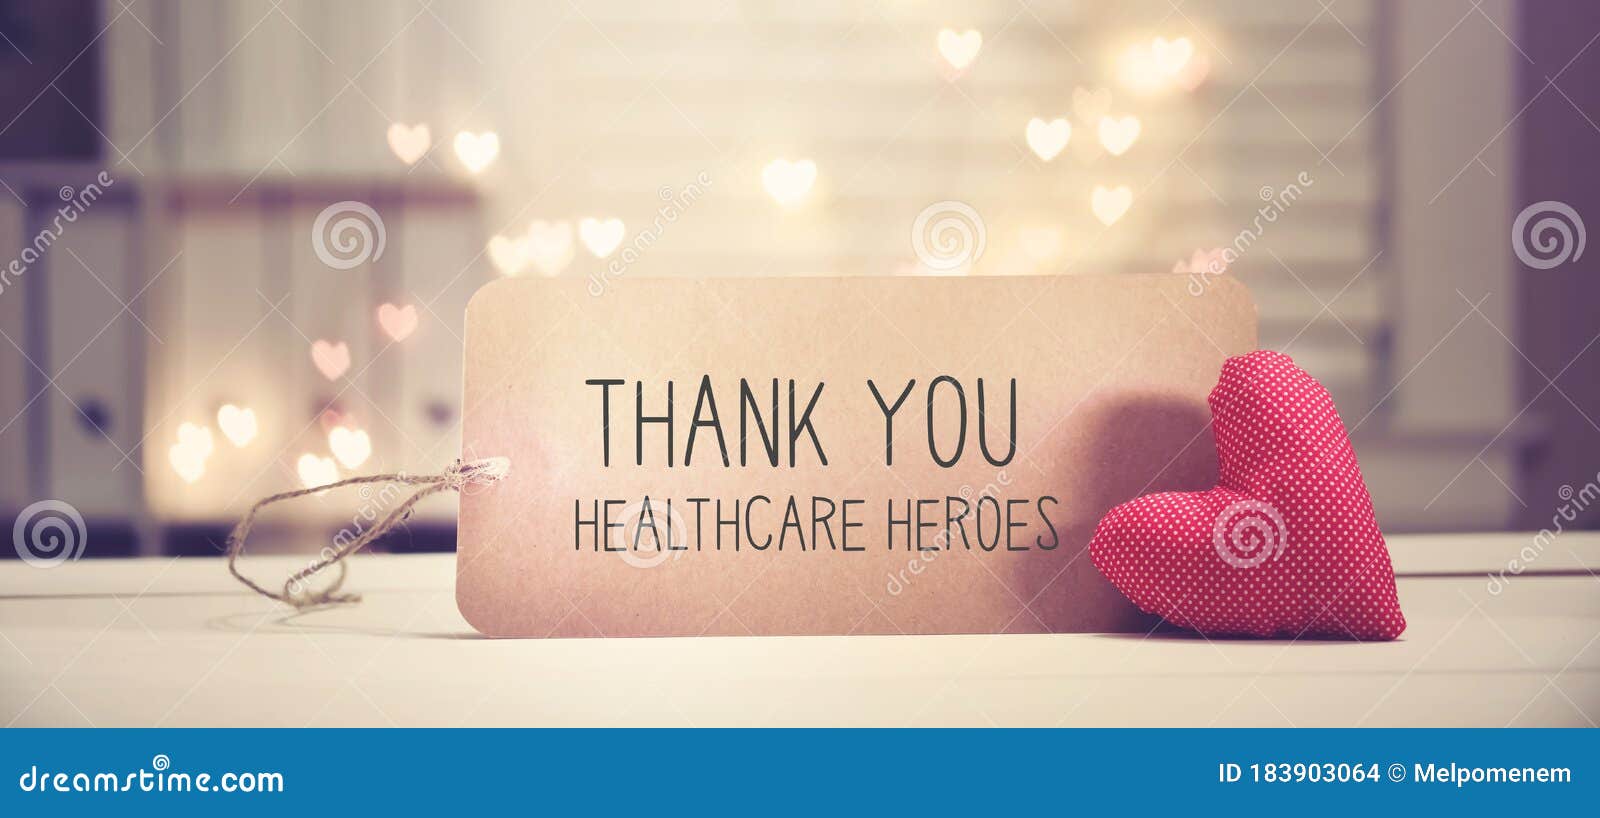 thank you healthcare heroes message with a red heart